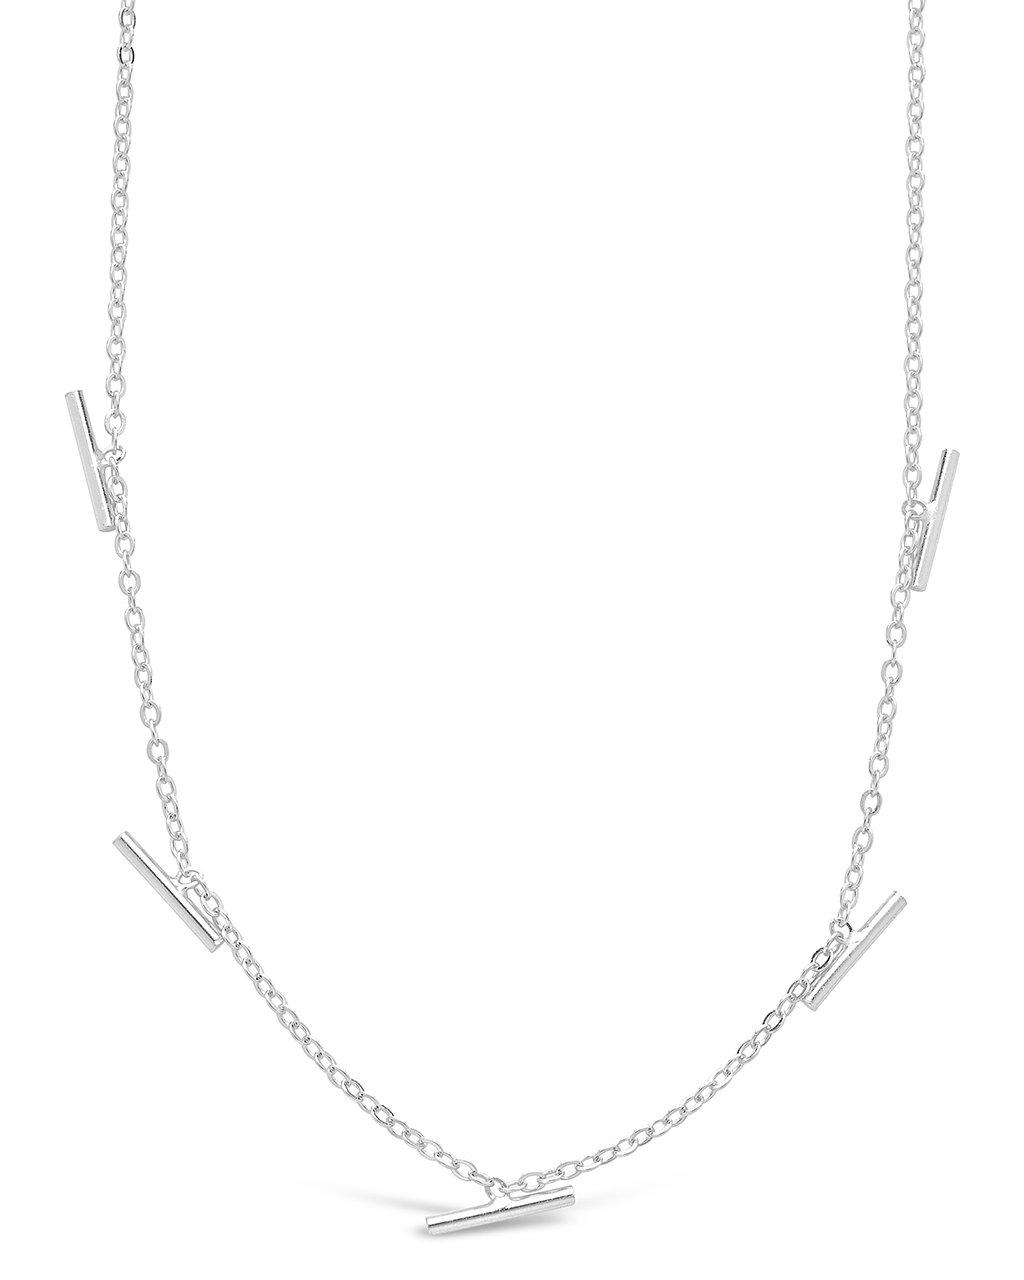 Sterling Silver Bar Charm Necklace - Sterling Forever